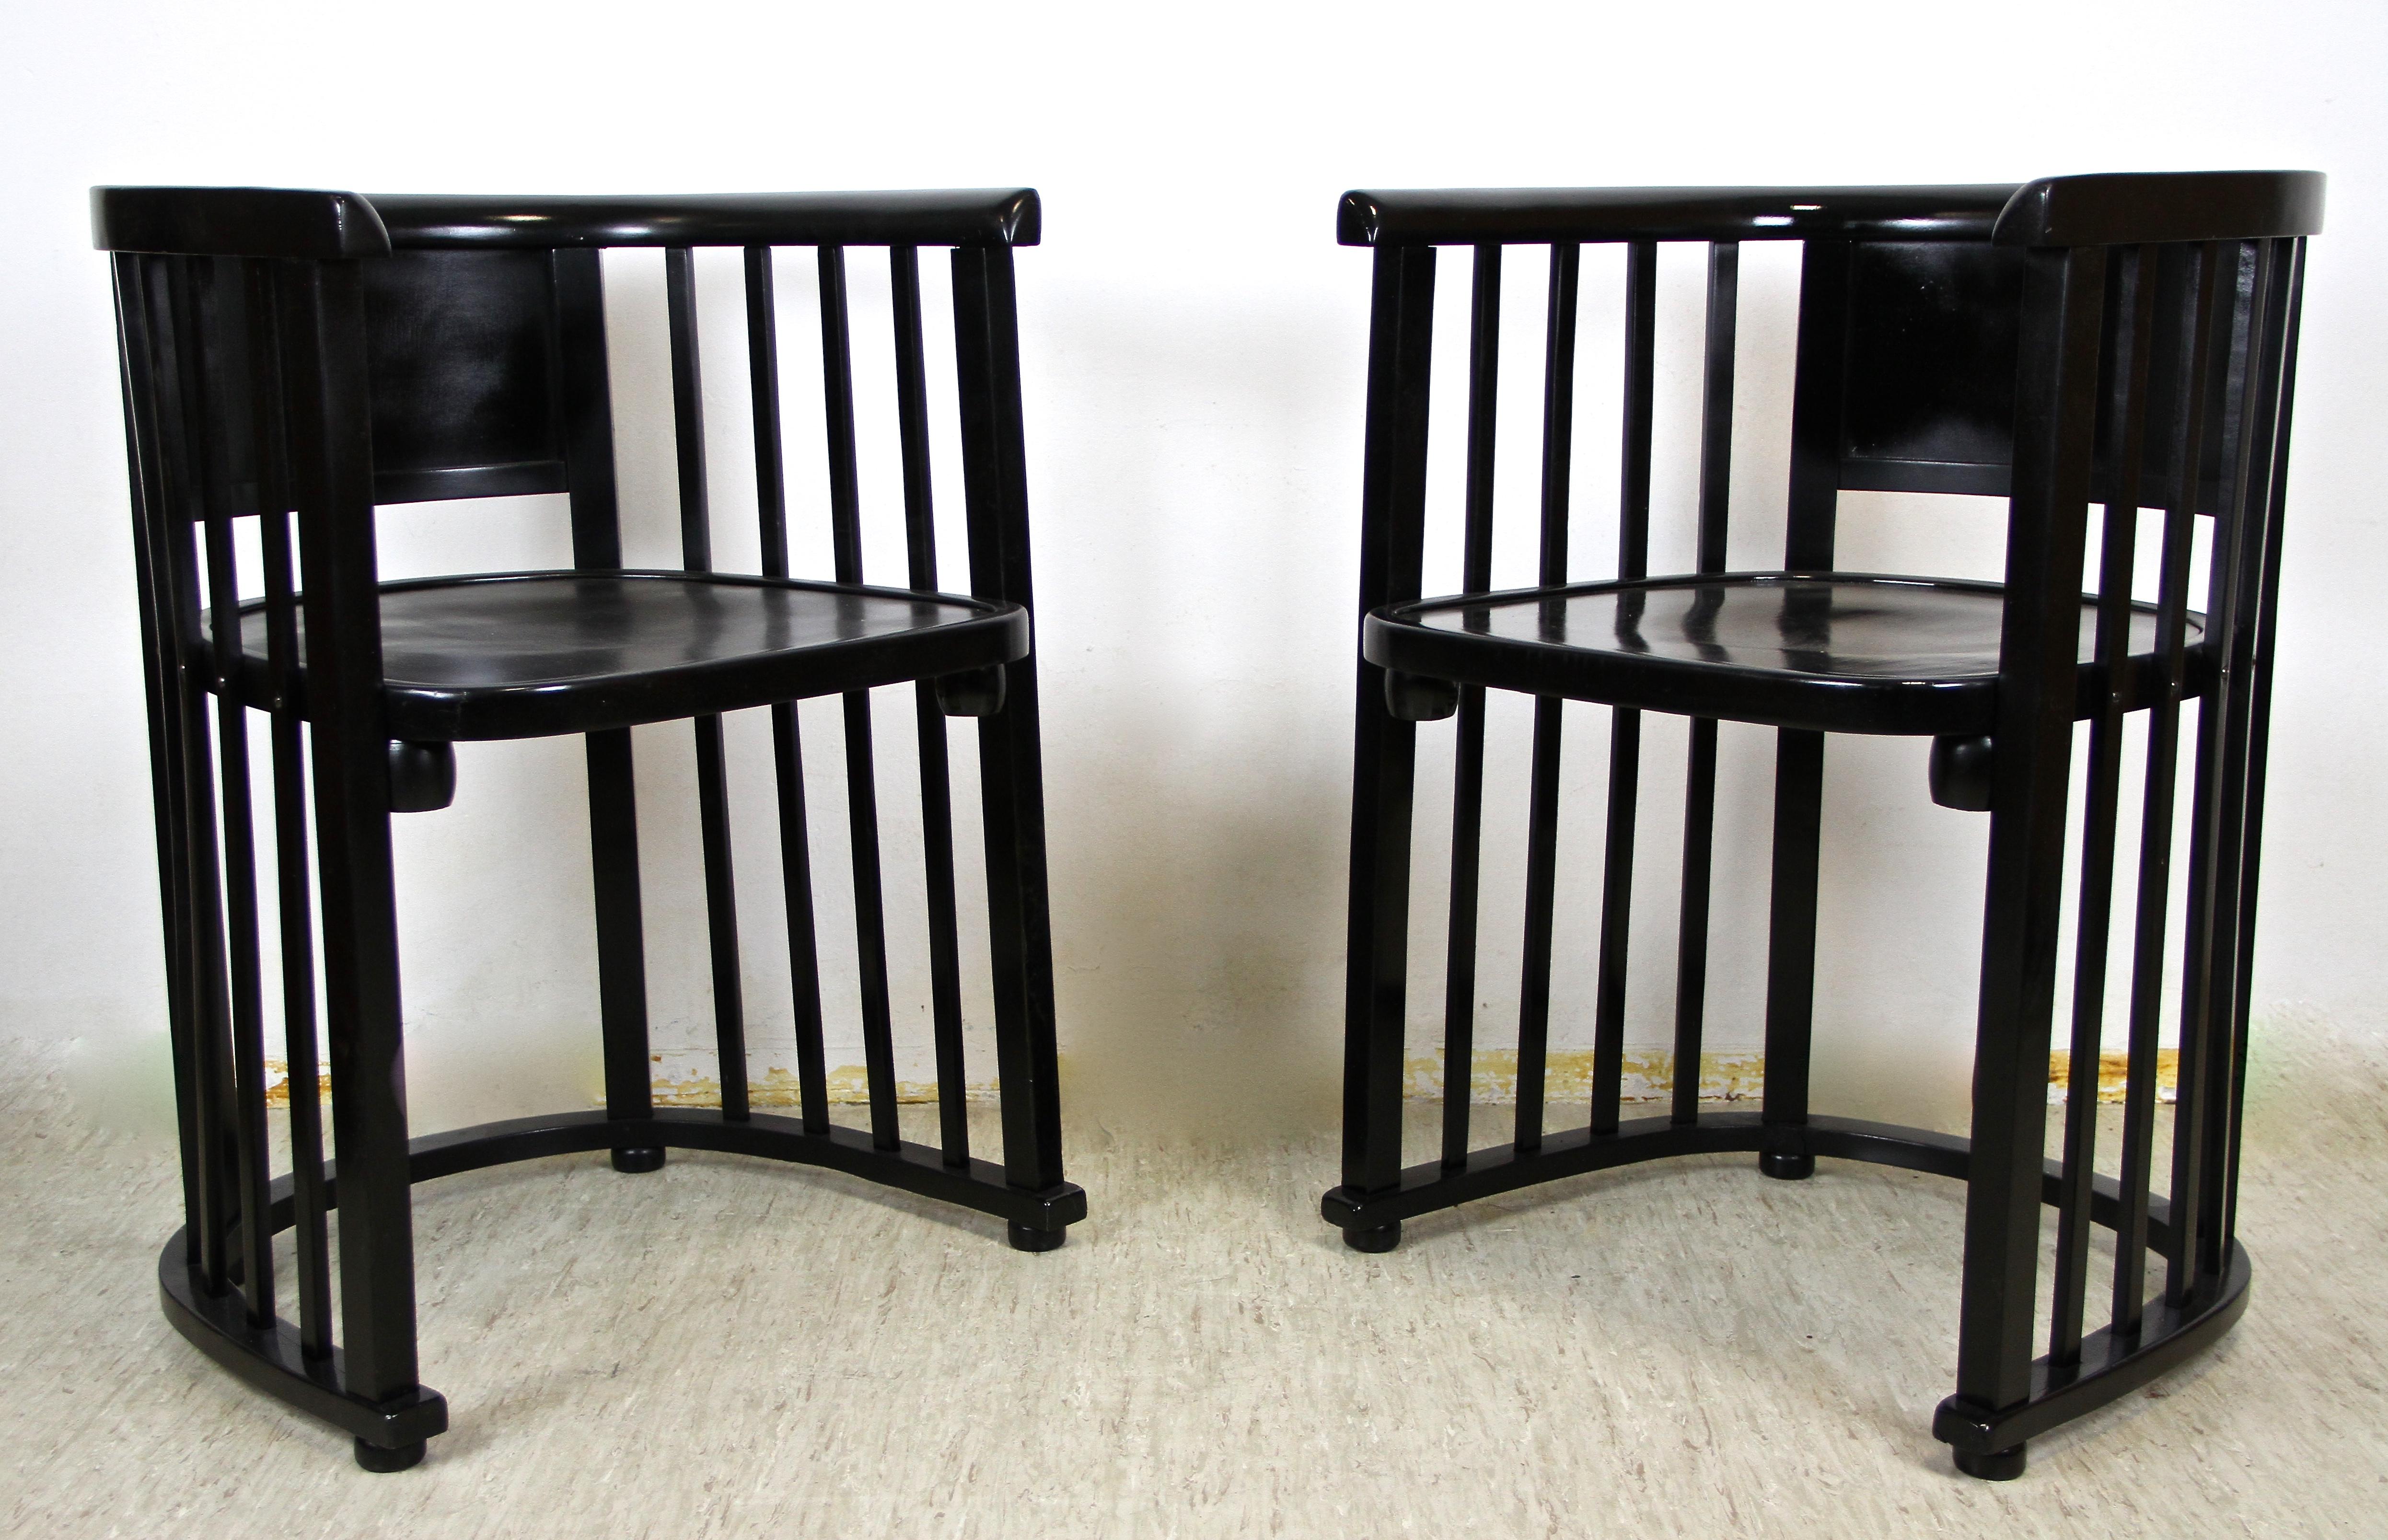 Black lacquered bentwood chairs designed by the famous Austrian architect Josef Hoffmann, attributed to the renown company of Jacob & Josef Kohn Vienna. Josef Hoffmann was also the founding member of the world famous 